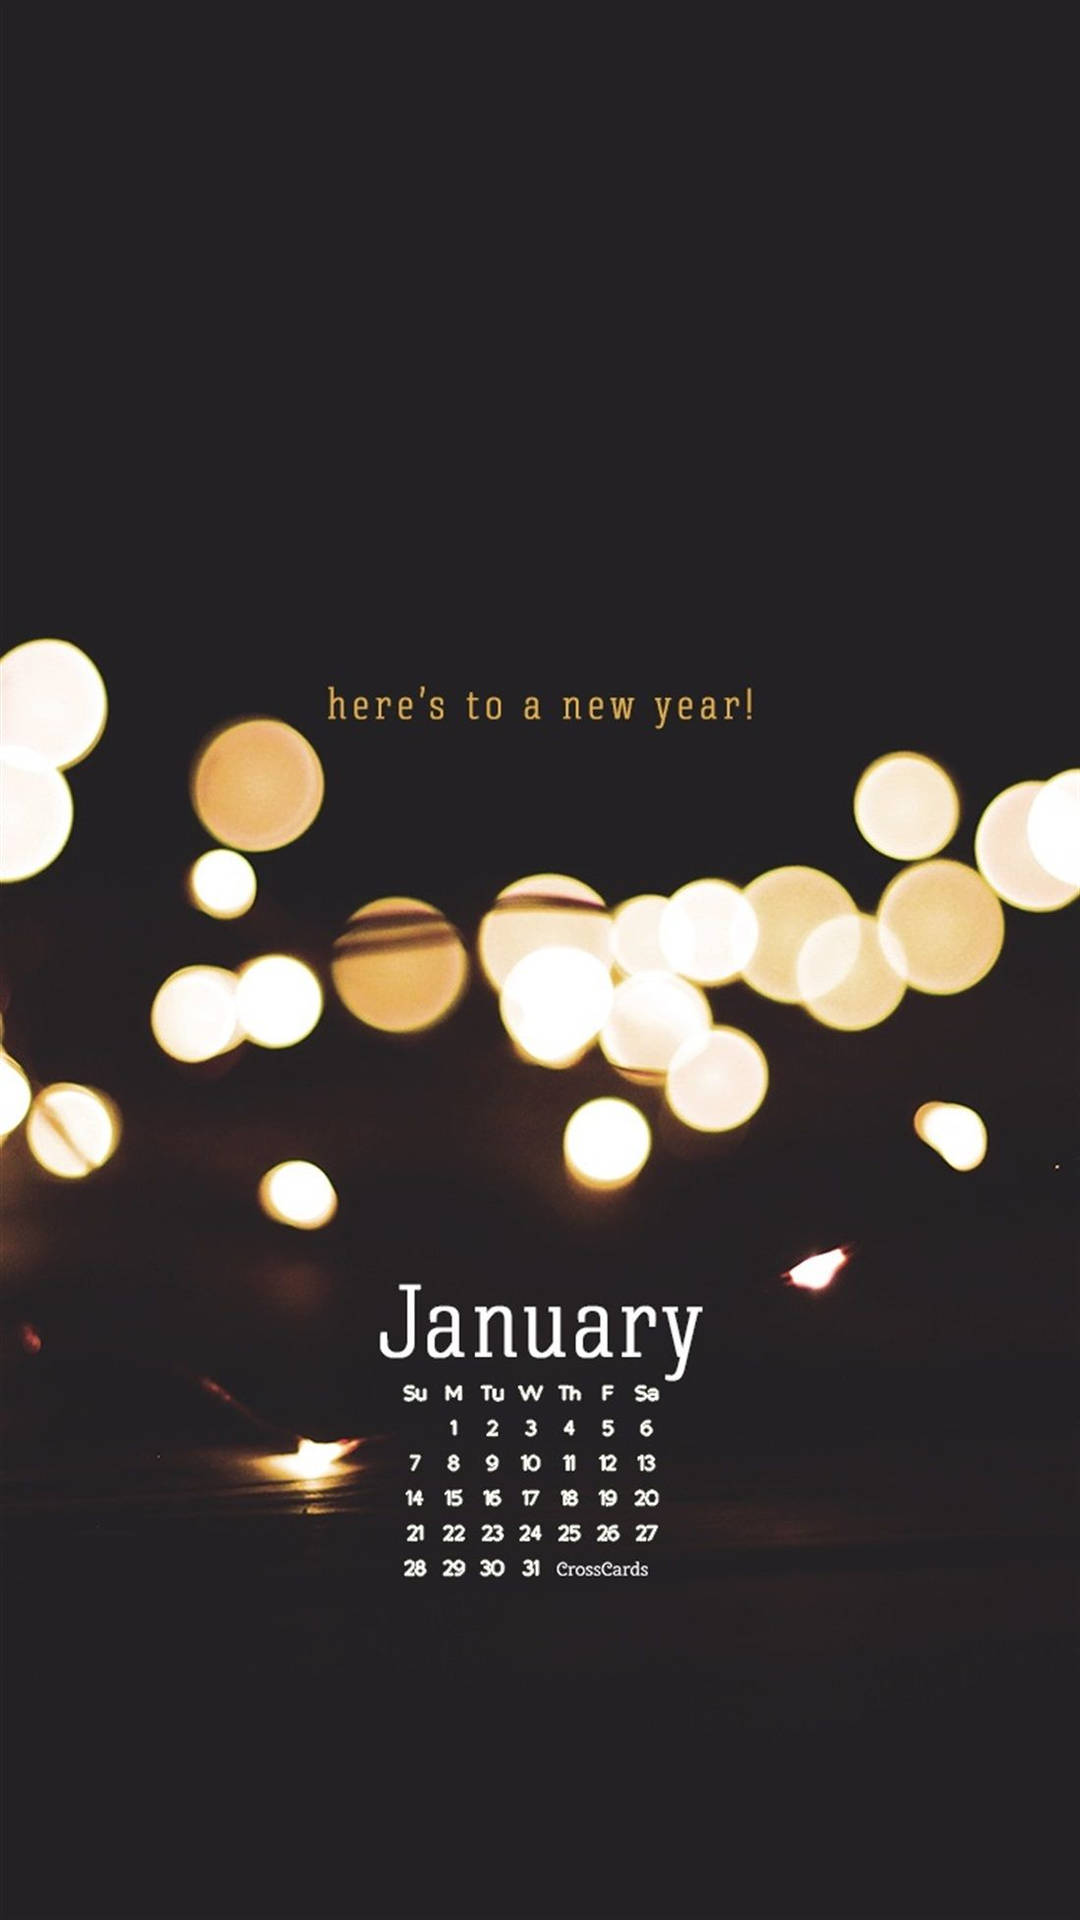 January Phone Calendar Quote Background